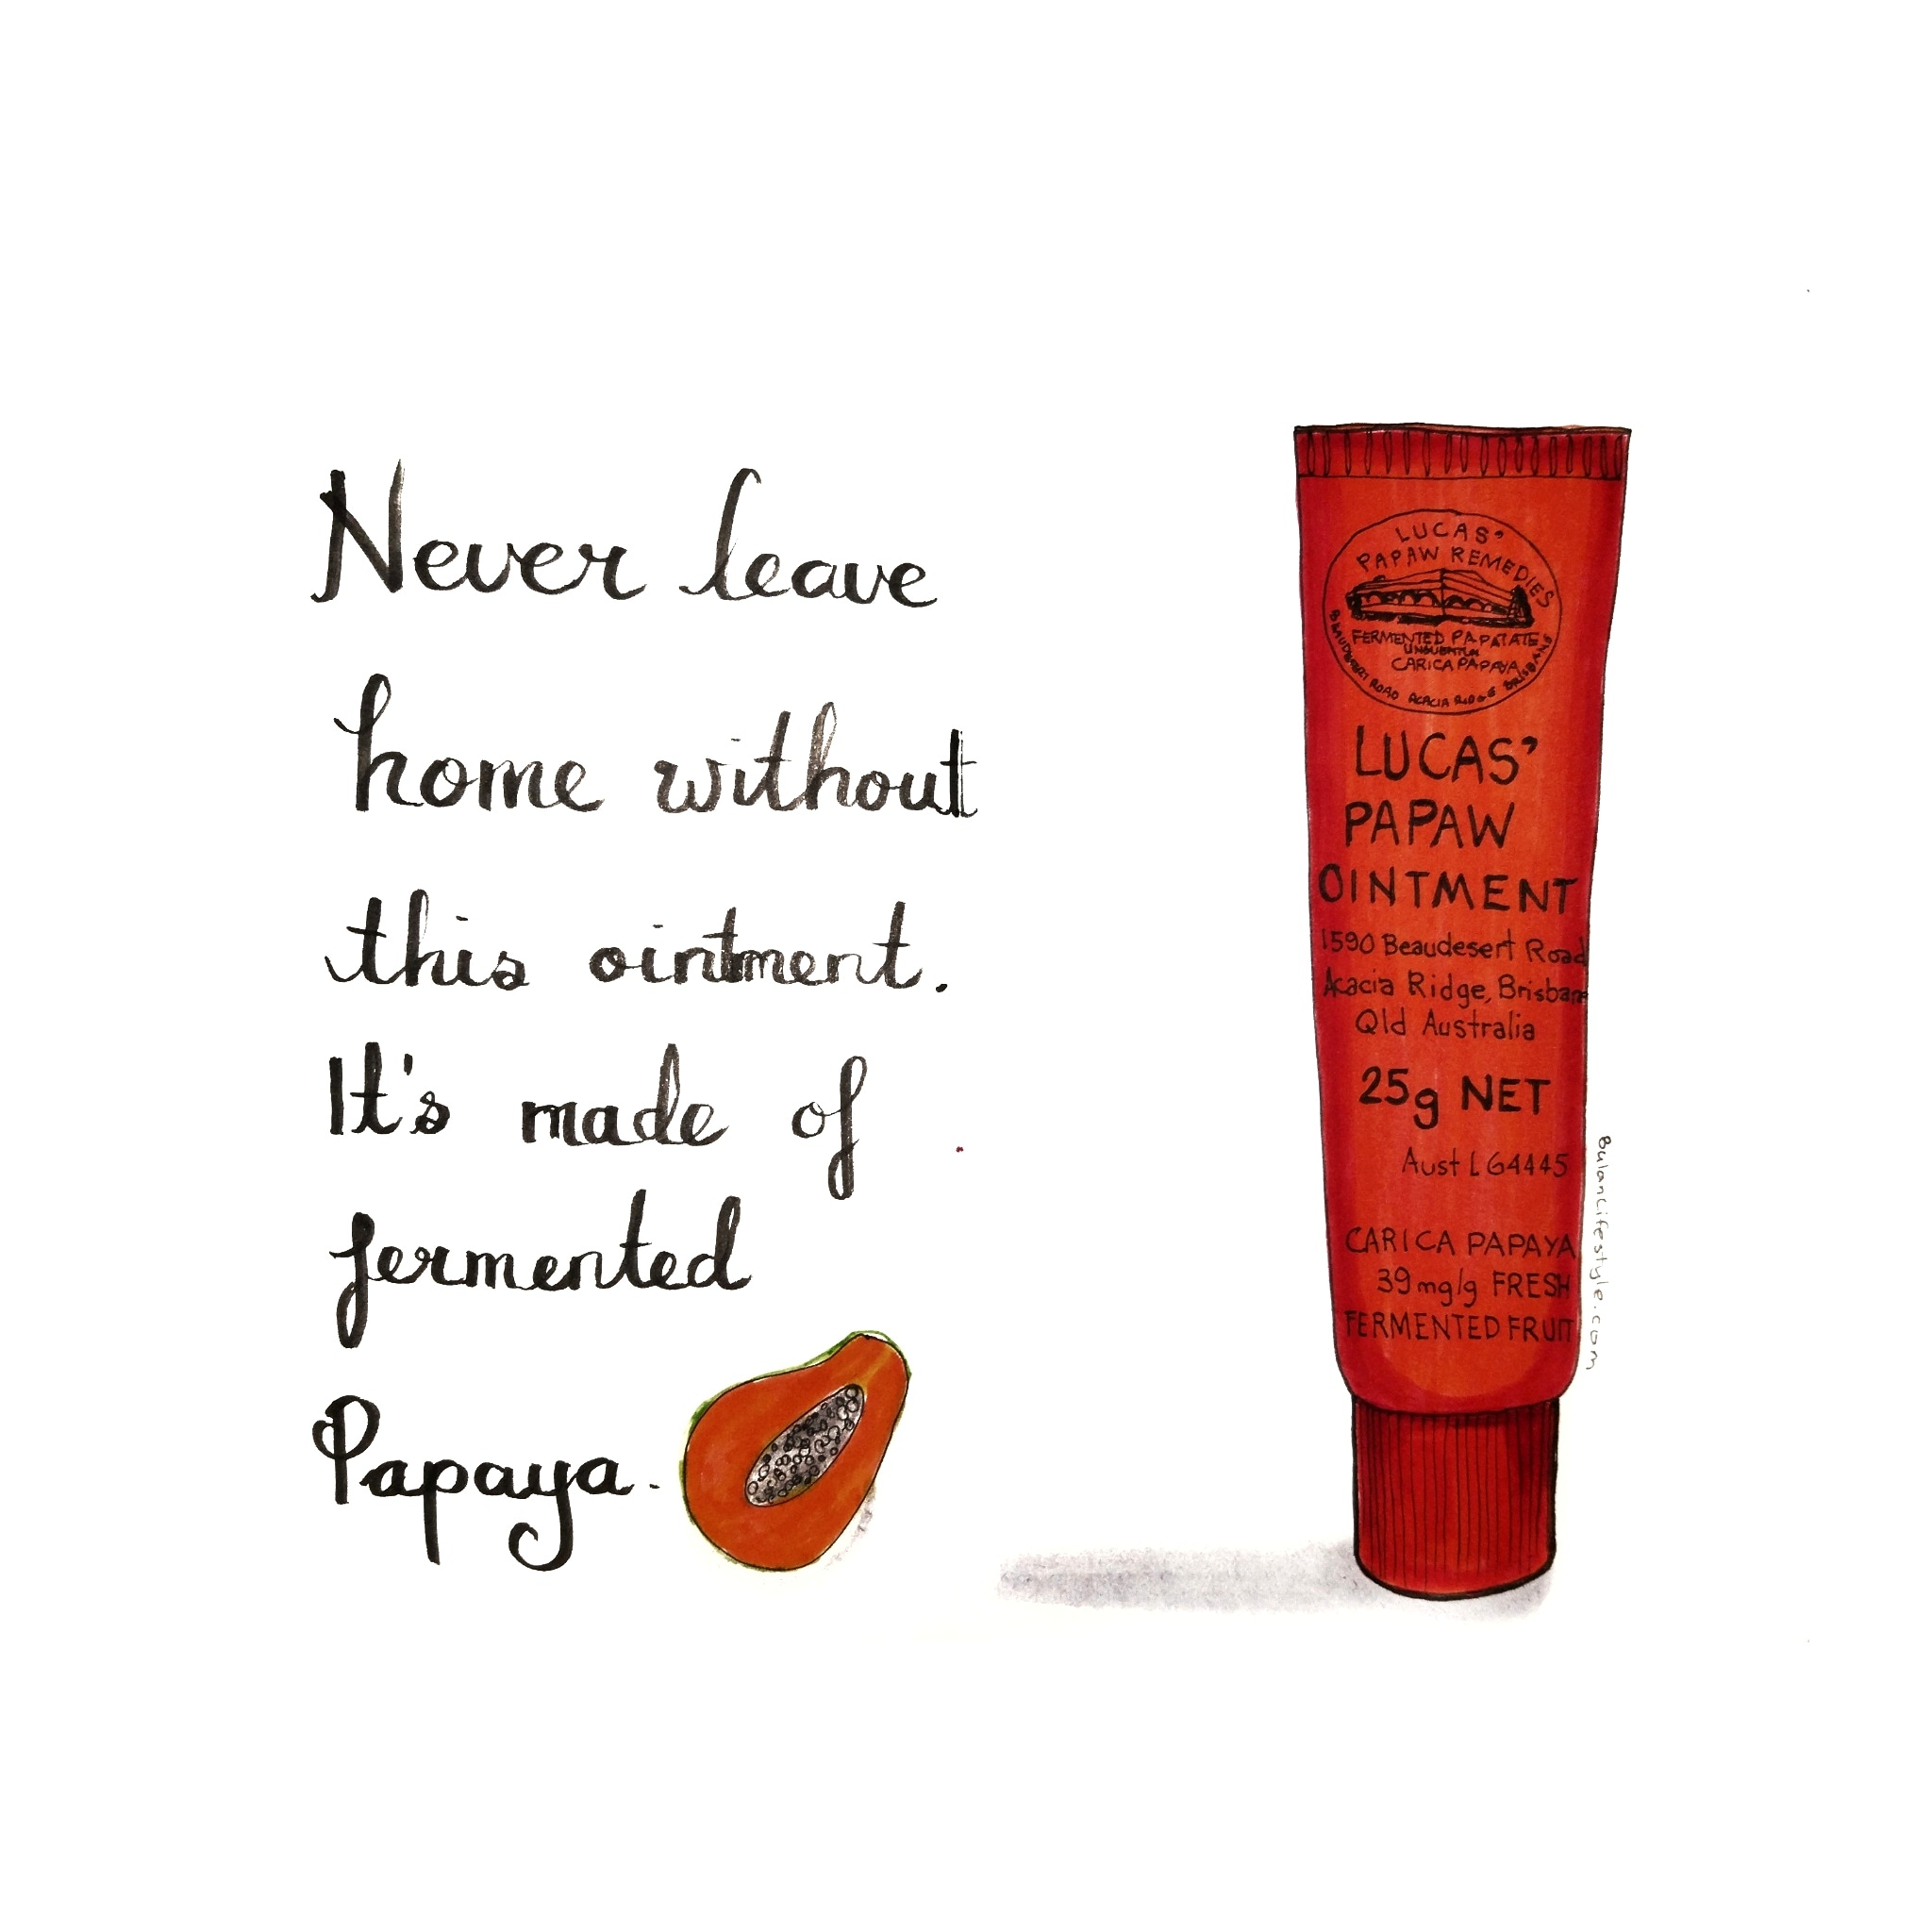 Never leave home without this ointment.